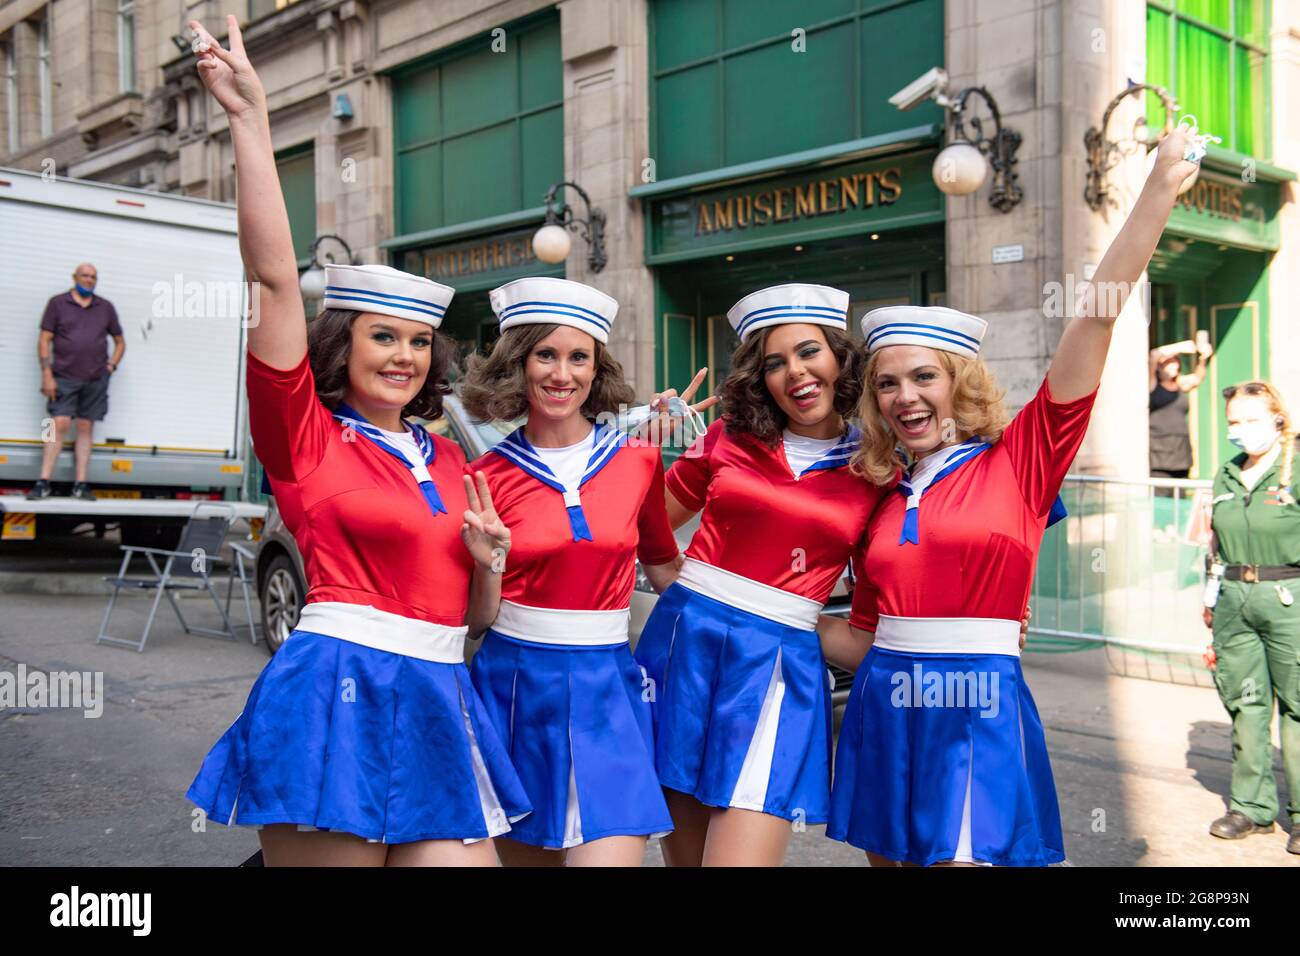 Glasgow, Scotland, UK. 21 July 2021.  PICTURED: A group of cheerleaders seen taking a break in between takes on the film set. Filming on the set of Indiana Jones 5 in the middle of Glasgow city centre as the Hollywood blockbuster sets up Glasgow as New York City. A full production can be seen, with a large cast, producers and extras. The city centre has been changed so that all the shop fronts and building look like 1959 America. Credit: Colin Fisher Stock Photo